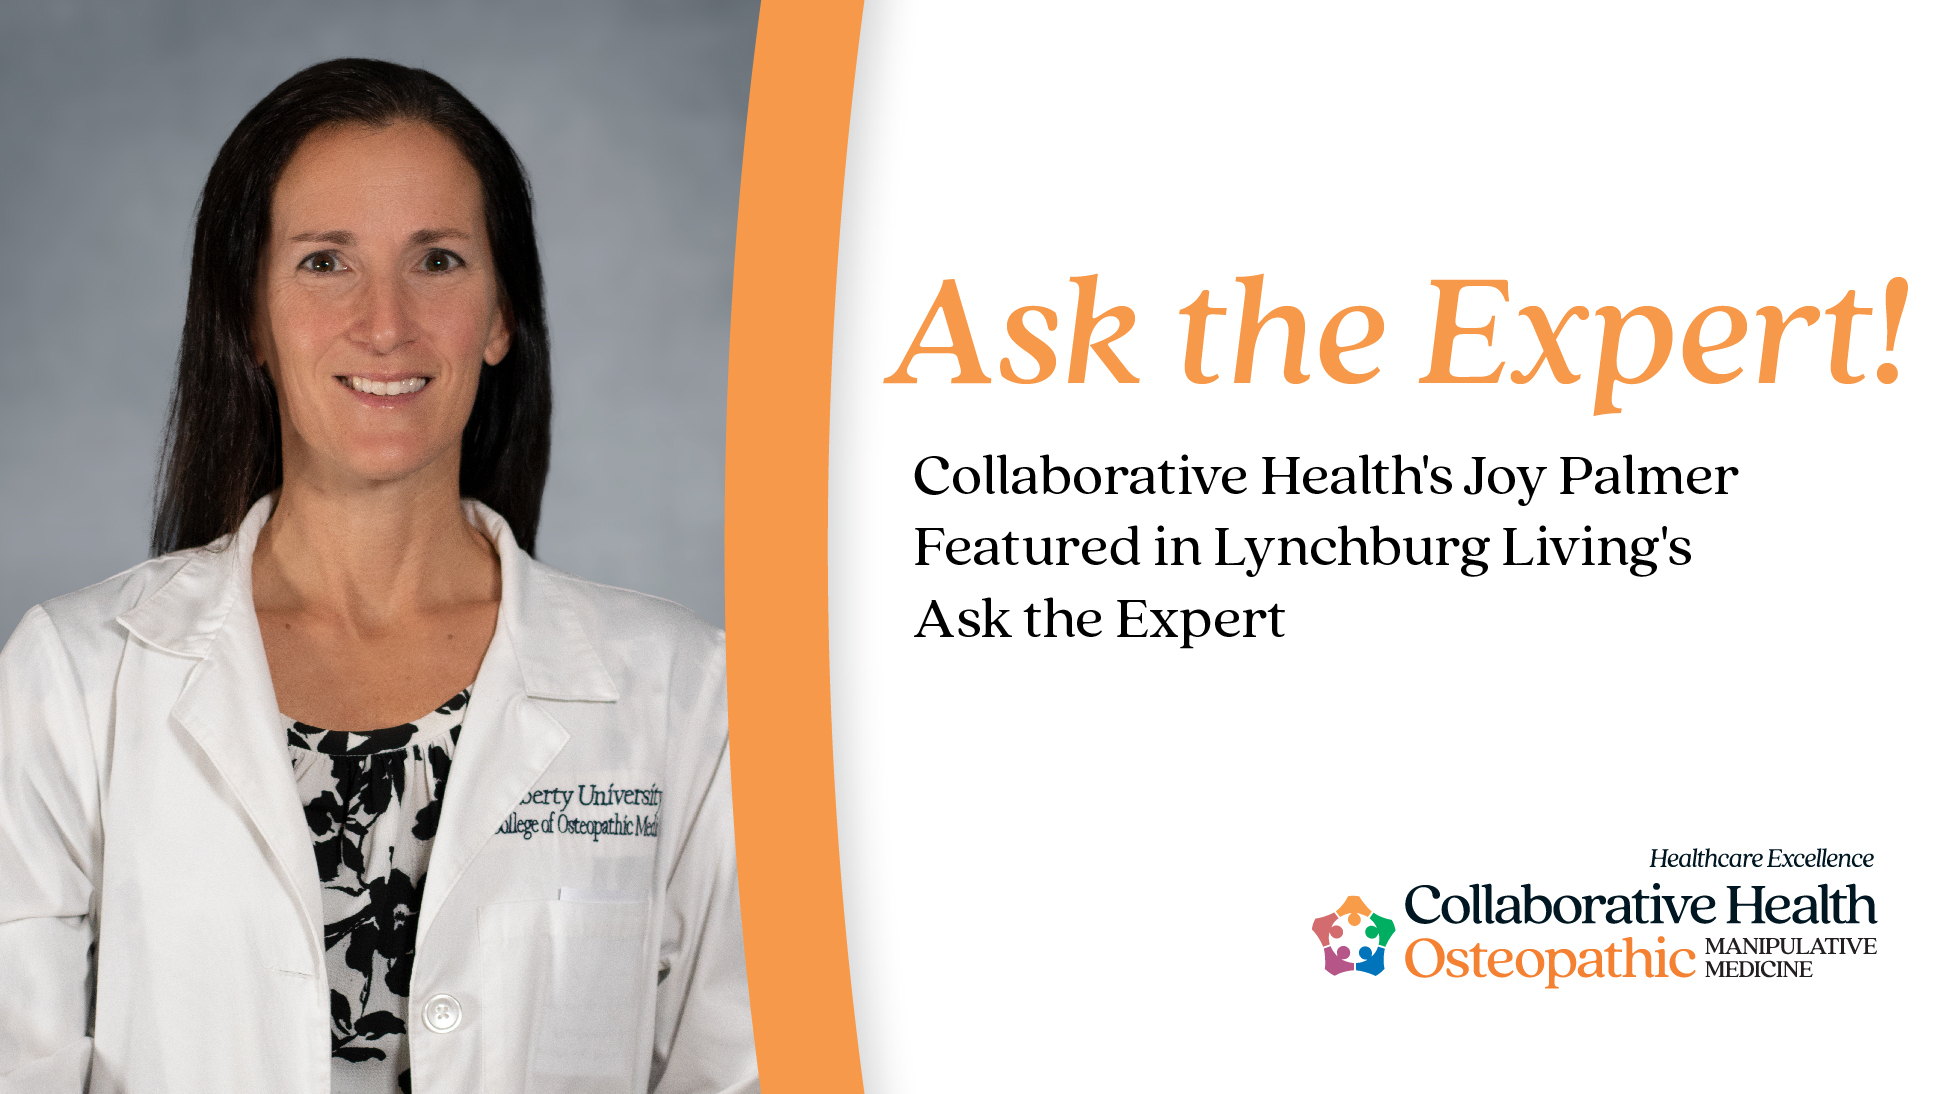 Collaborative Health's Joy Palmer Featured in Lynchburg Living's Ask the Expert